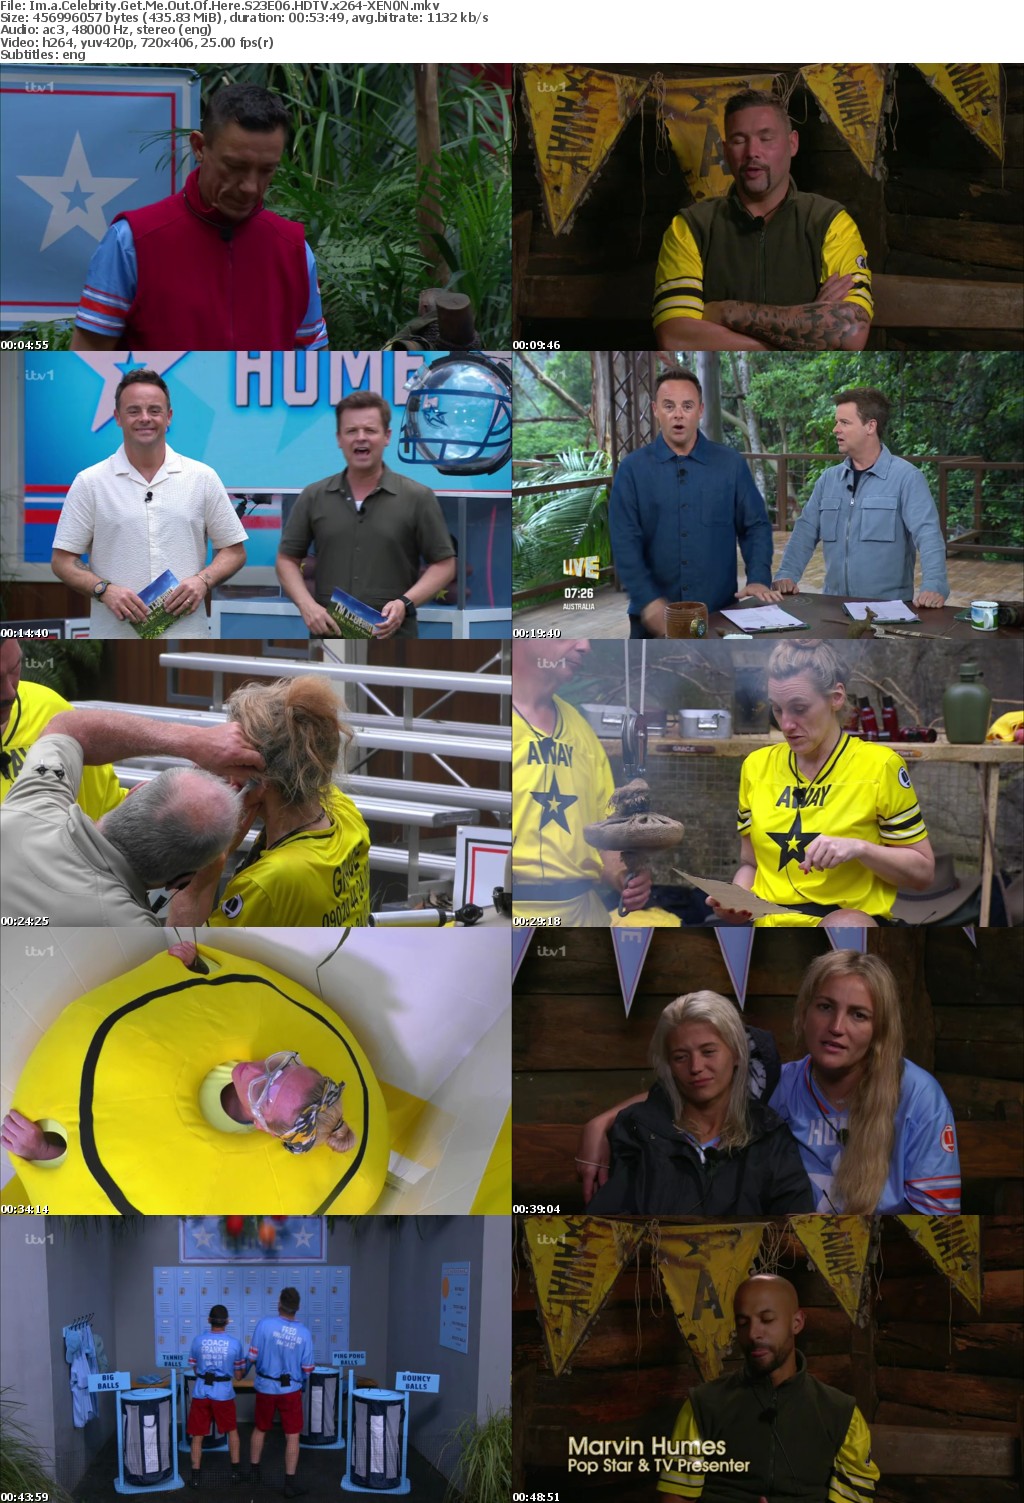 Im a Celebrity Get Me Out Of Here S23E06 HDTV x264-XEN0N